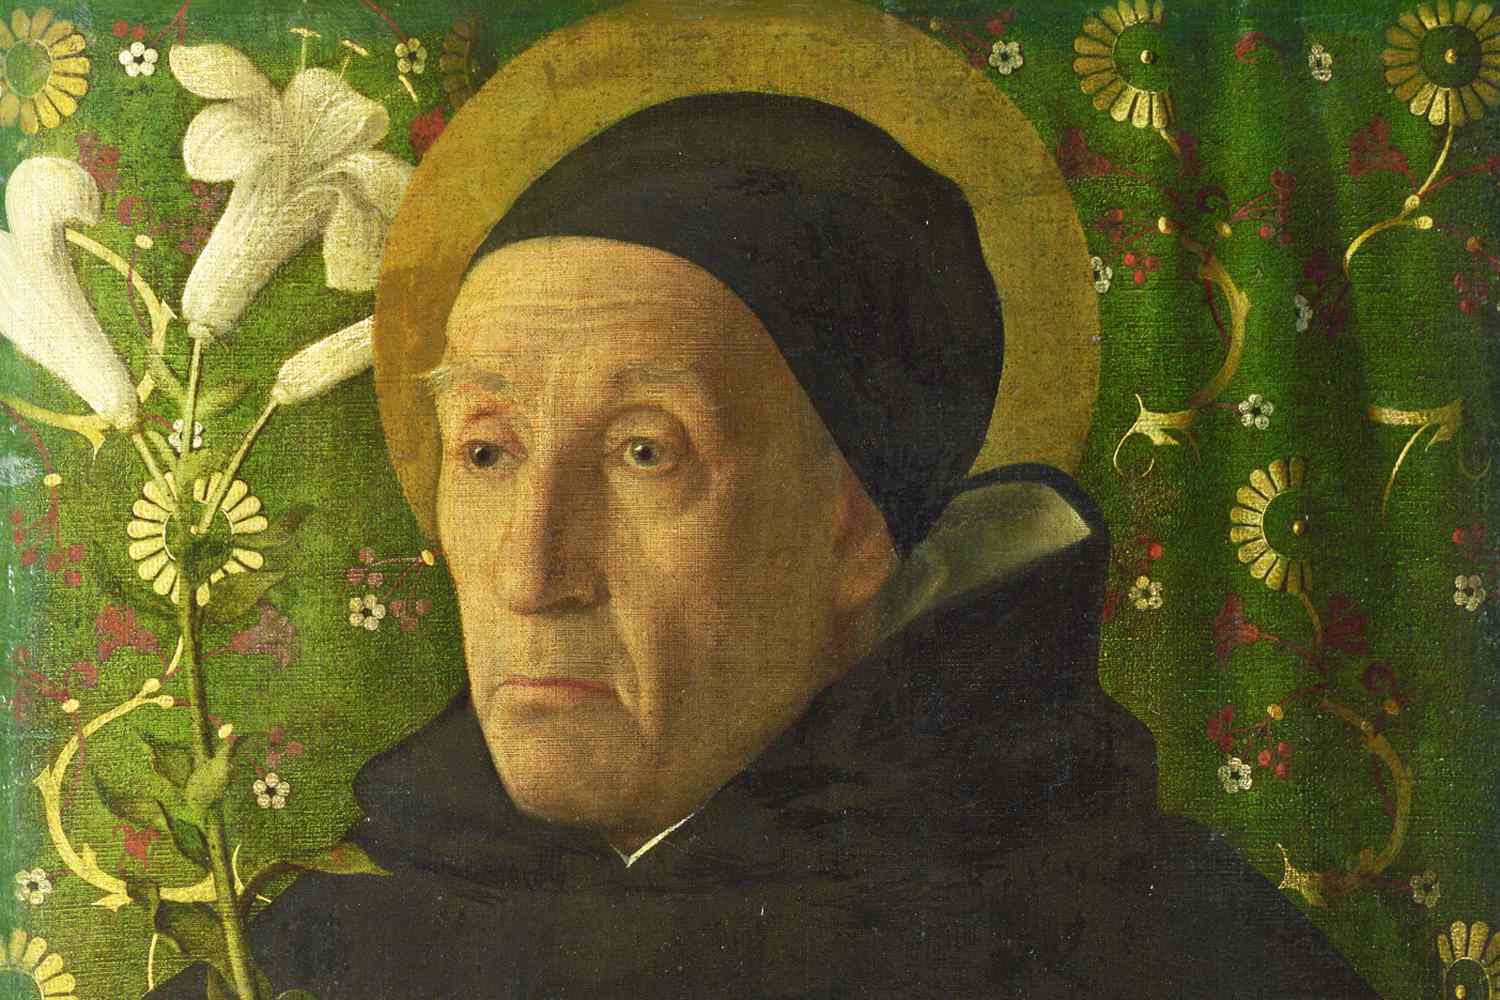 Biography and Legacy of Meister Eckhart